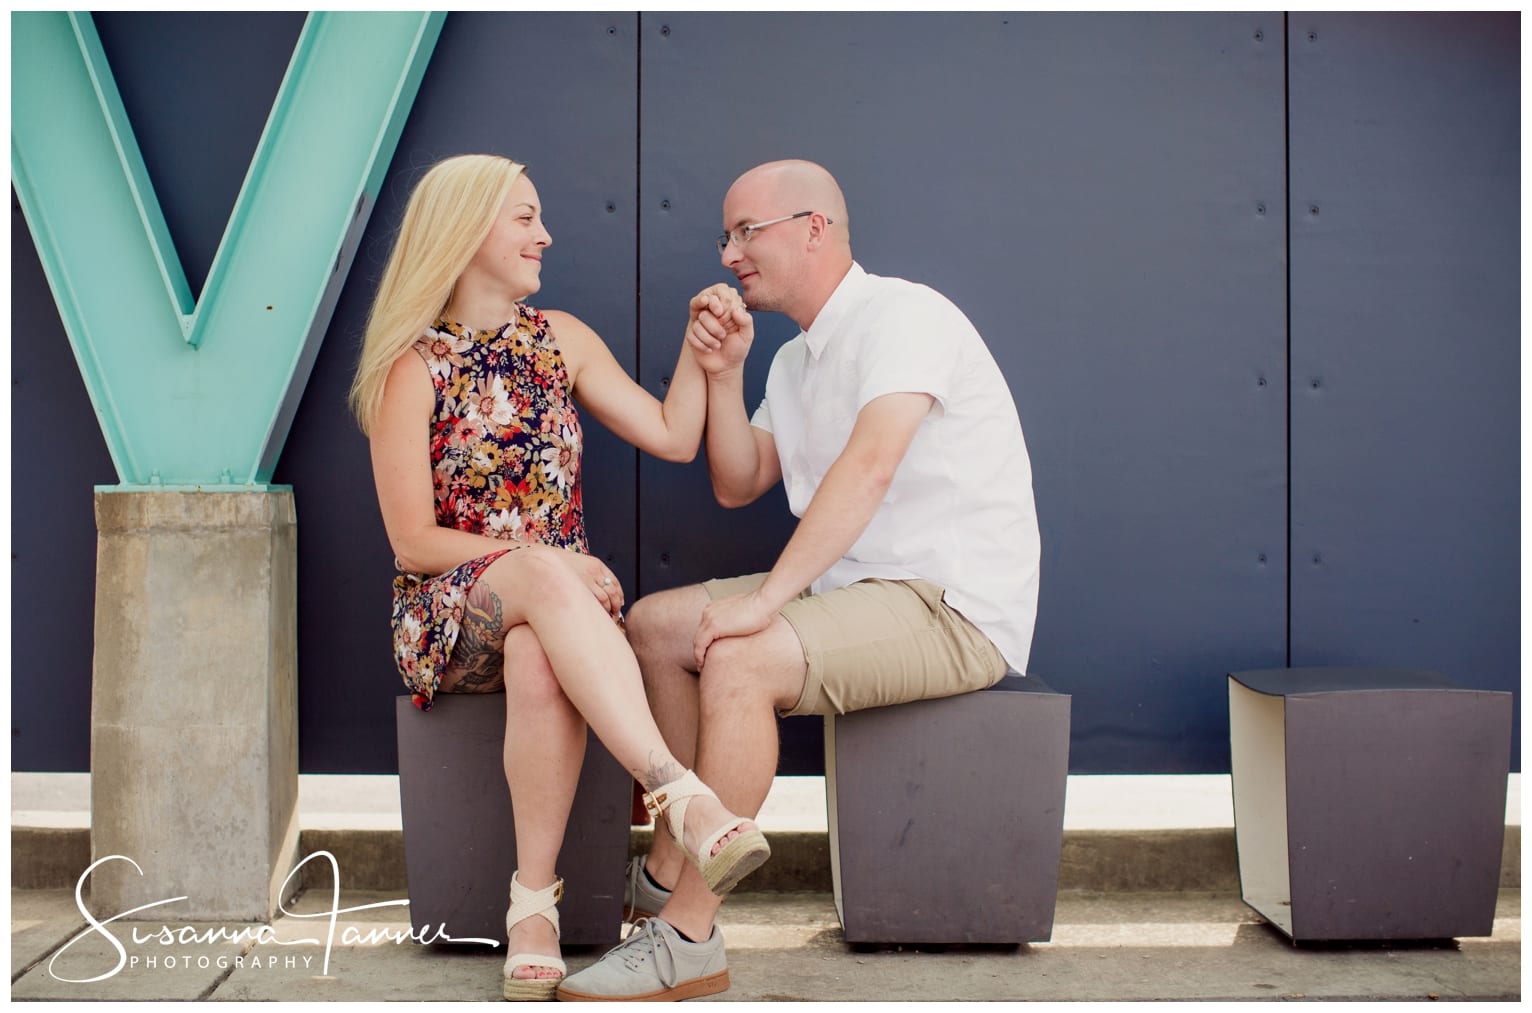 Fountain Square Indianapolis Photography Engagement Session male about to kiss female's hand while she looks adoringly at him